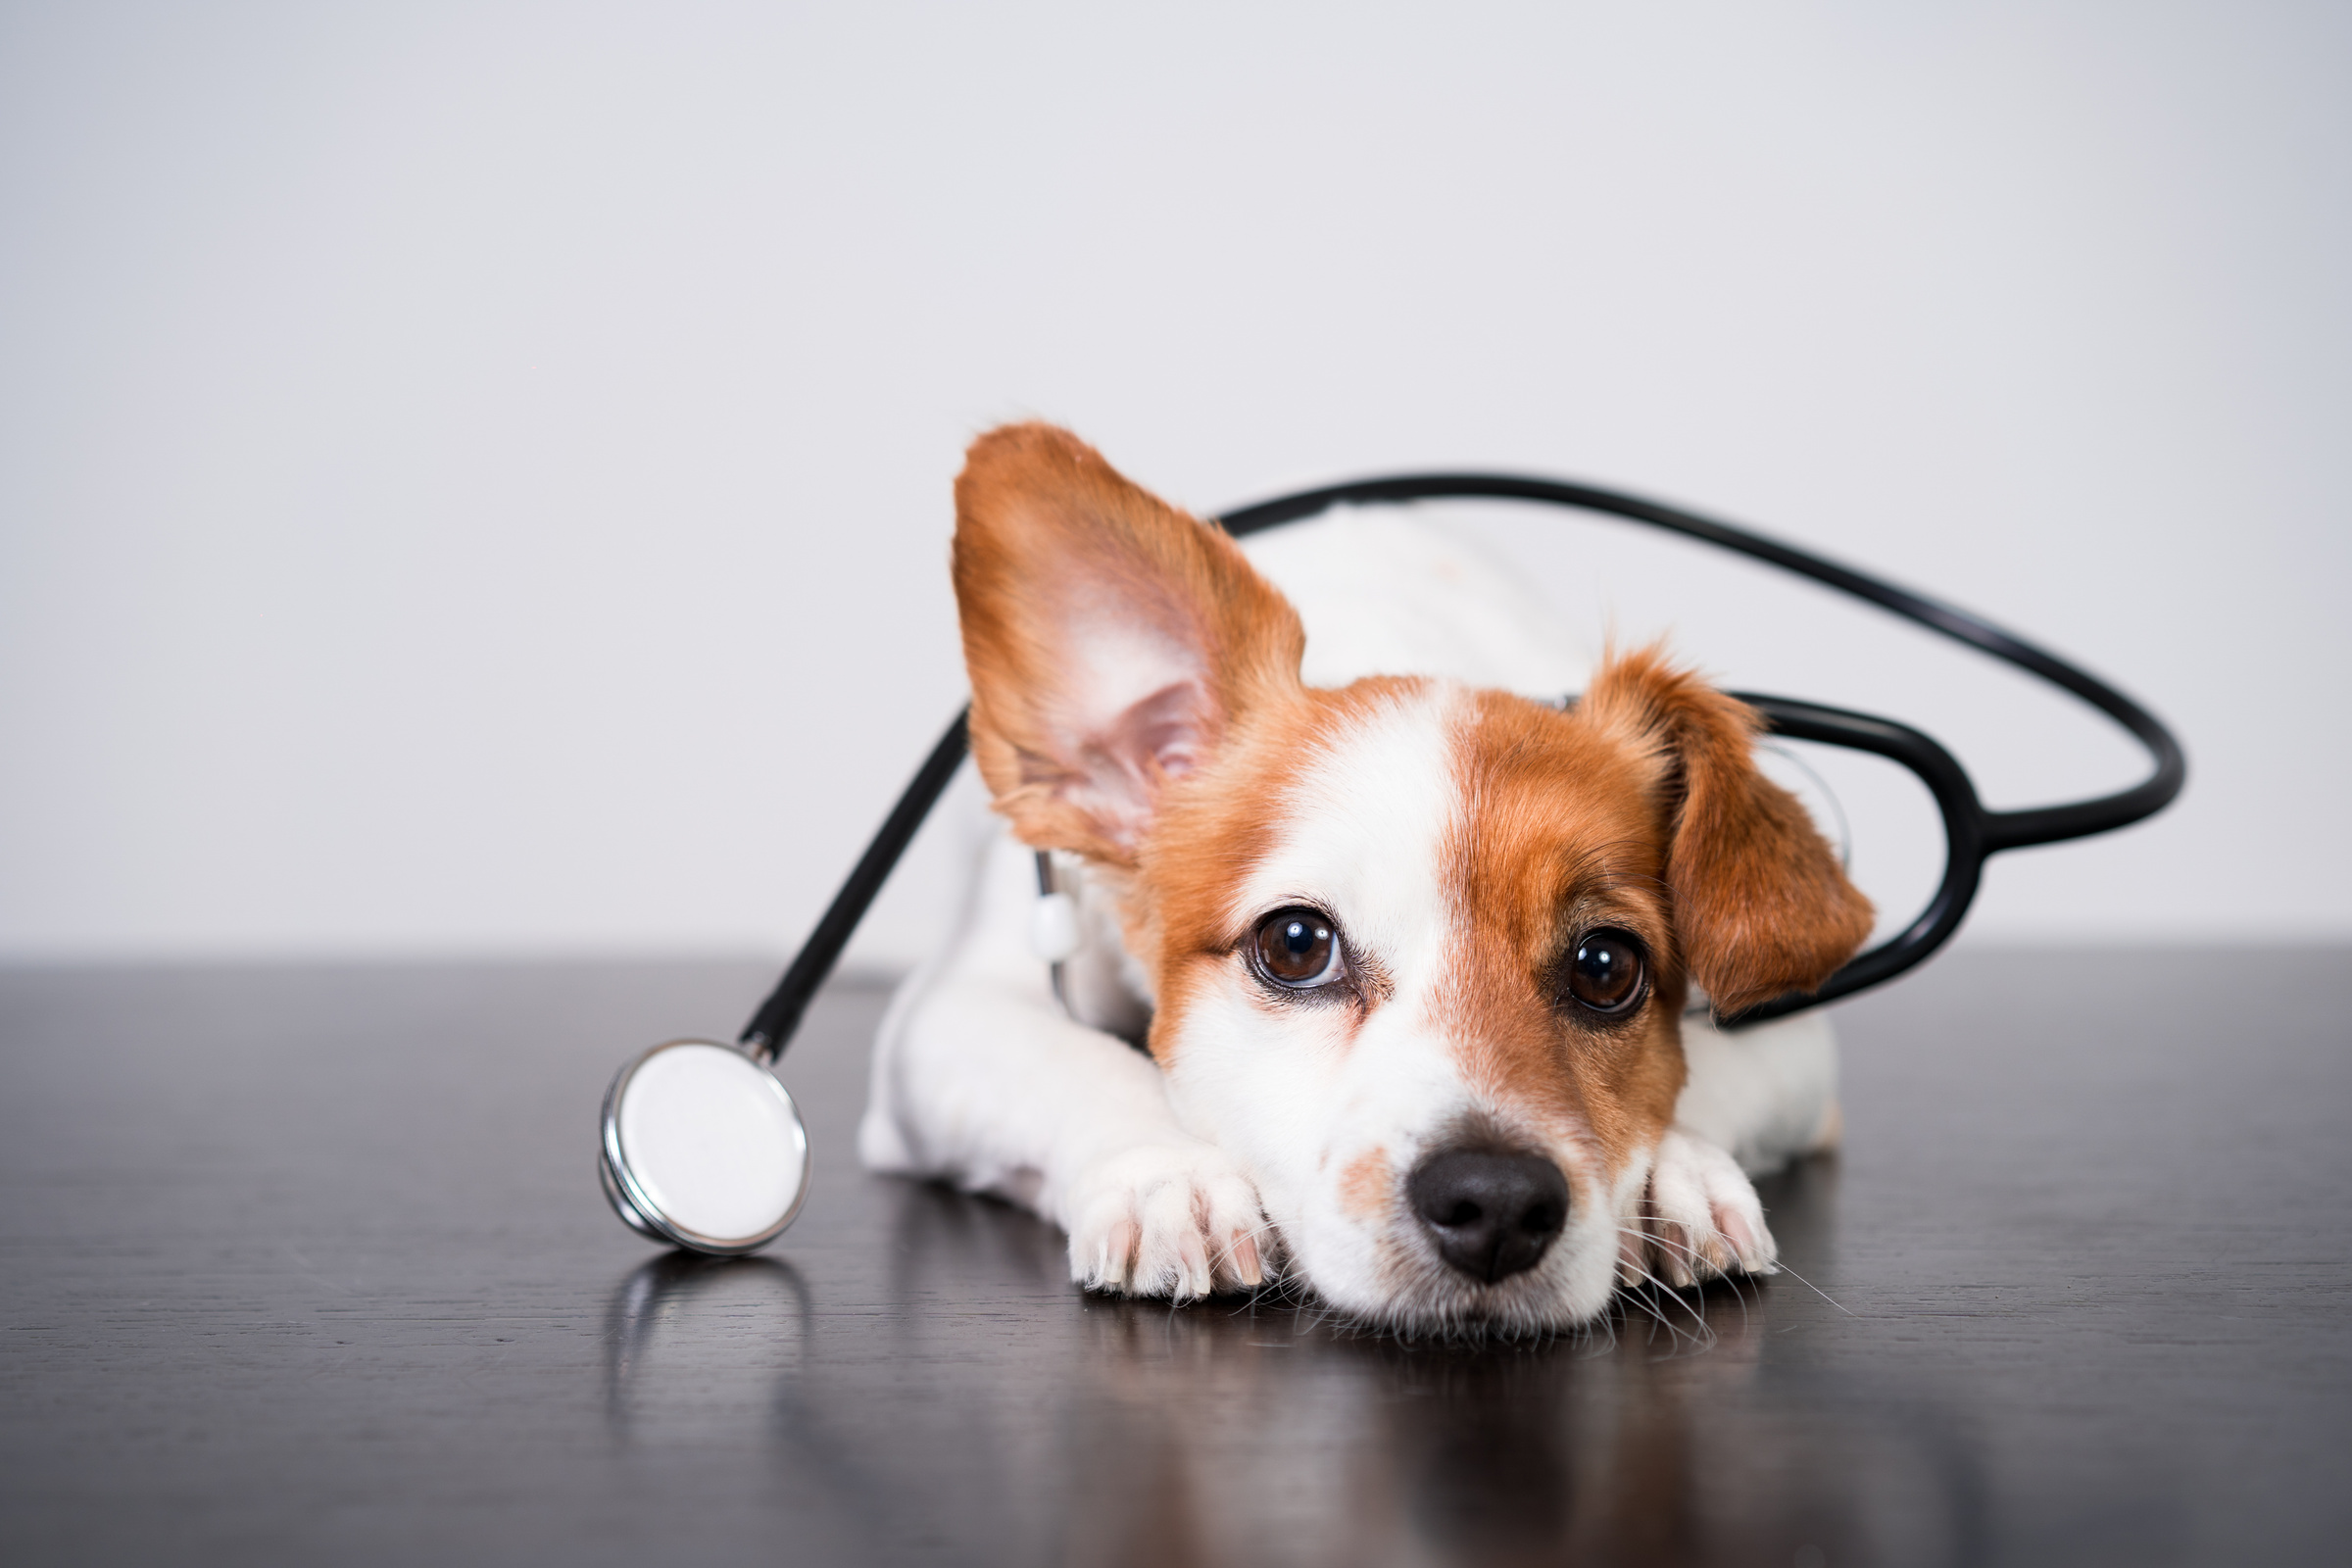 Cute Jack Russell Dog at Veterinary Clinic with Stethoscope